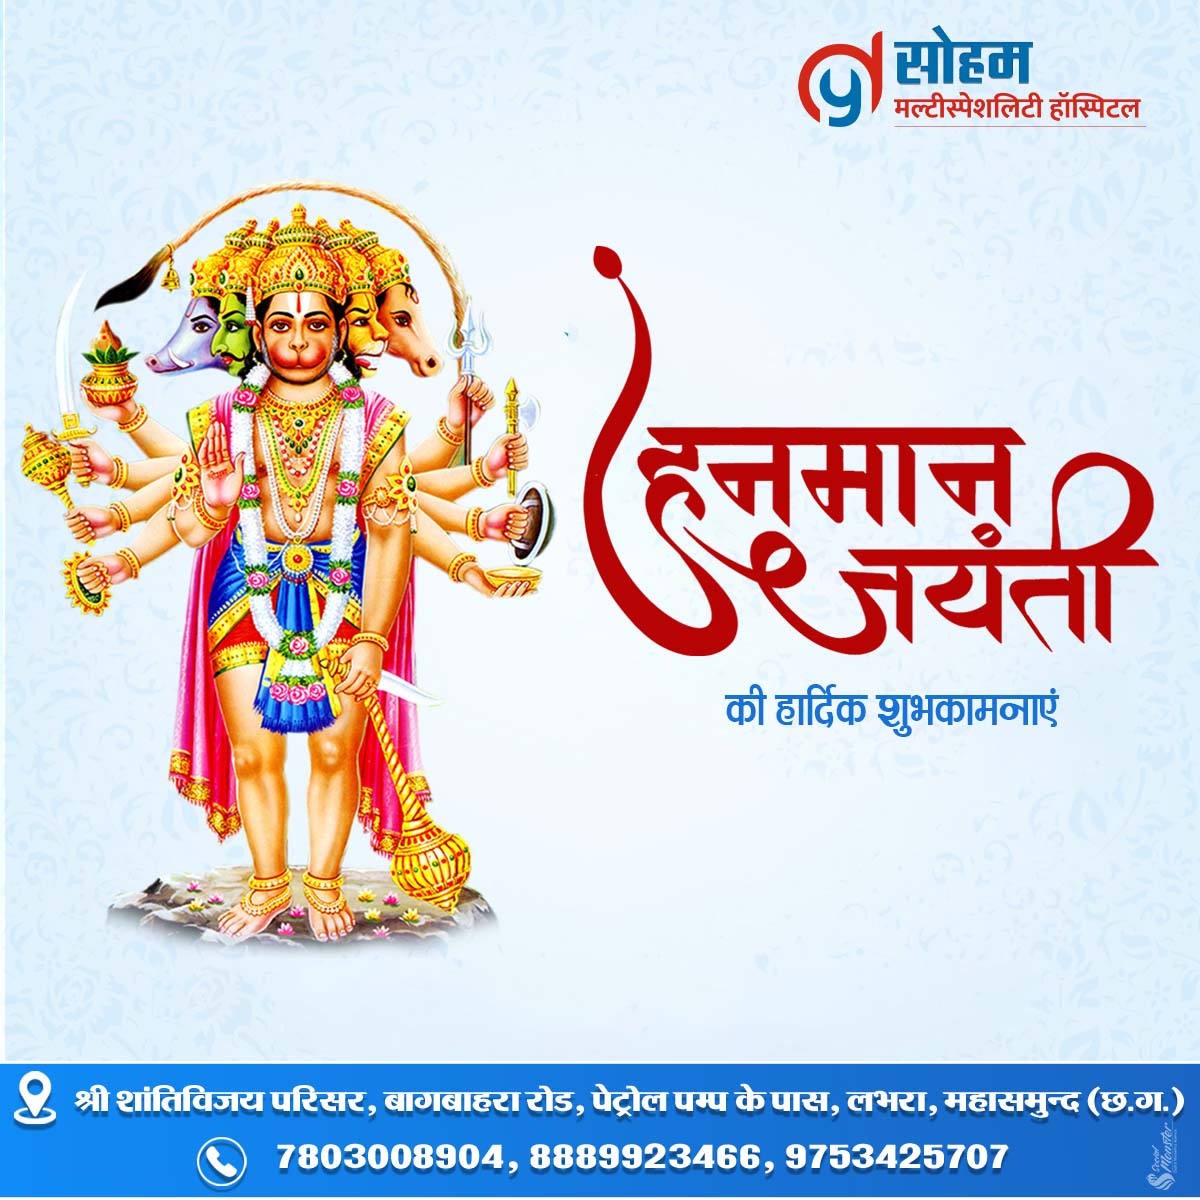 Wishing you a blessed Hanuman Jayanti filled with strength, courage, and devotion. May Lord Hanuman bless you with wisdom and prosperity on this auspicious day!📷📷
.
.
.
#criticalcare #eyetreatment #gynecologist #obstretics #entdepartment #throatpain #skincare #SkinCareServices